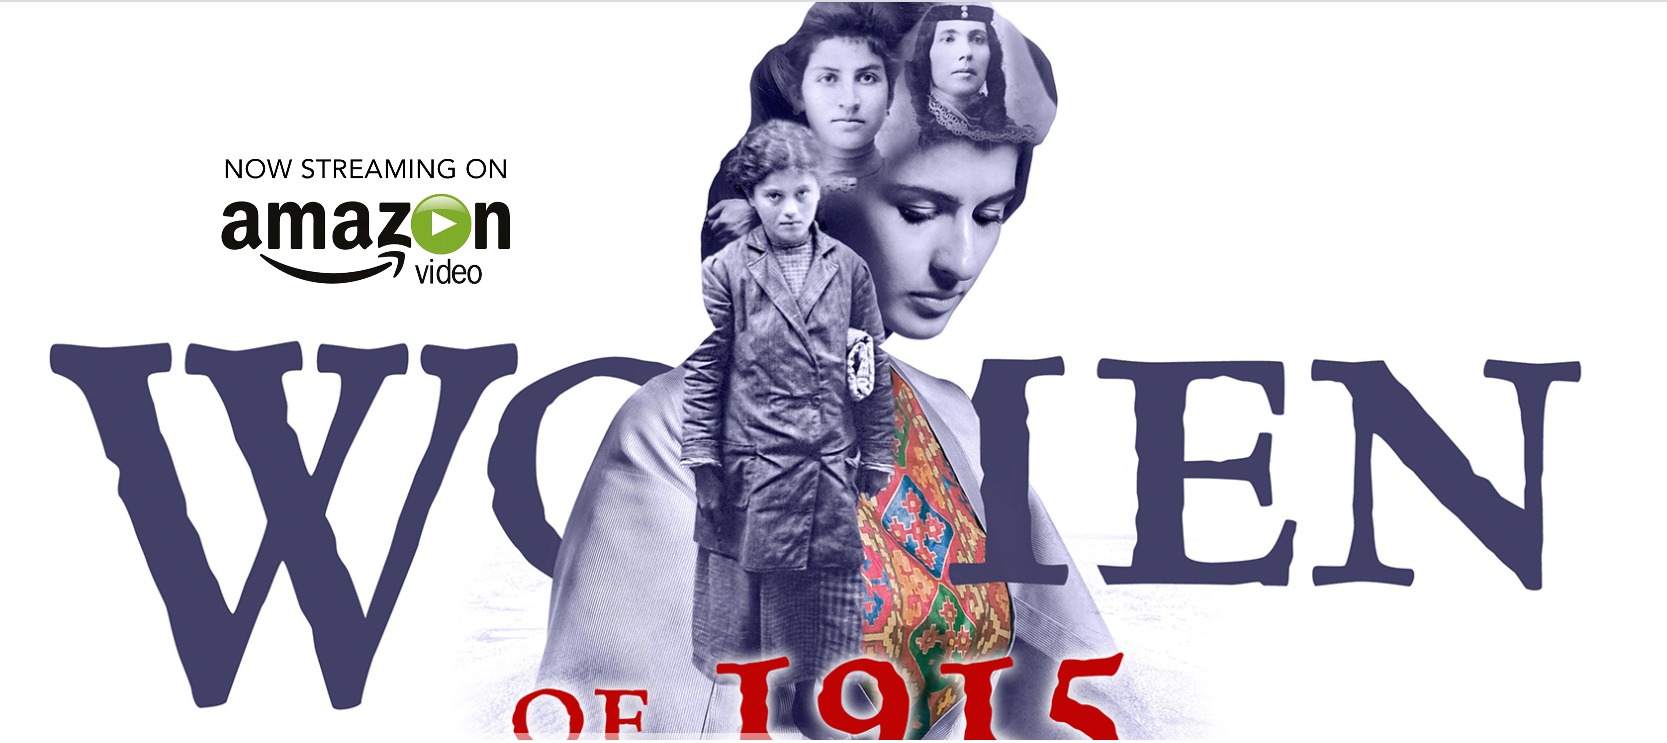 Women of 1915: Armenian Genocide documentary starts streaming on Amazon - The US Armenians